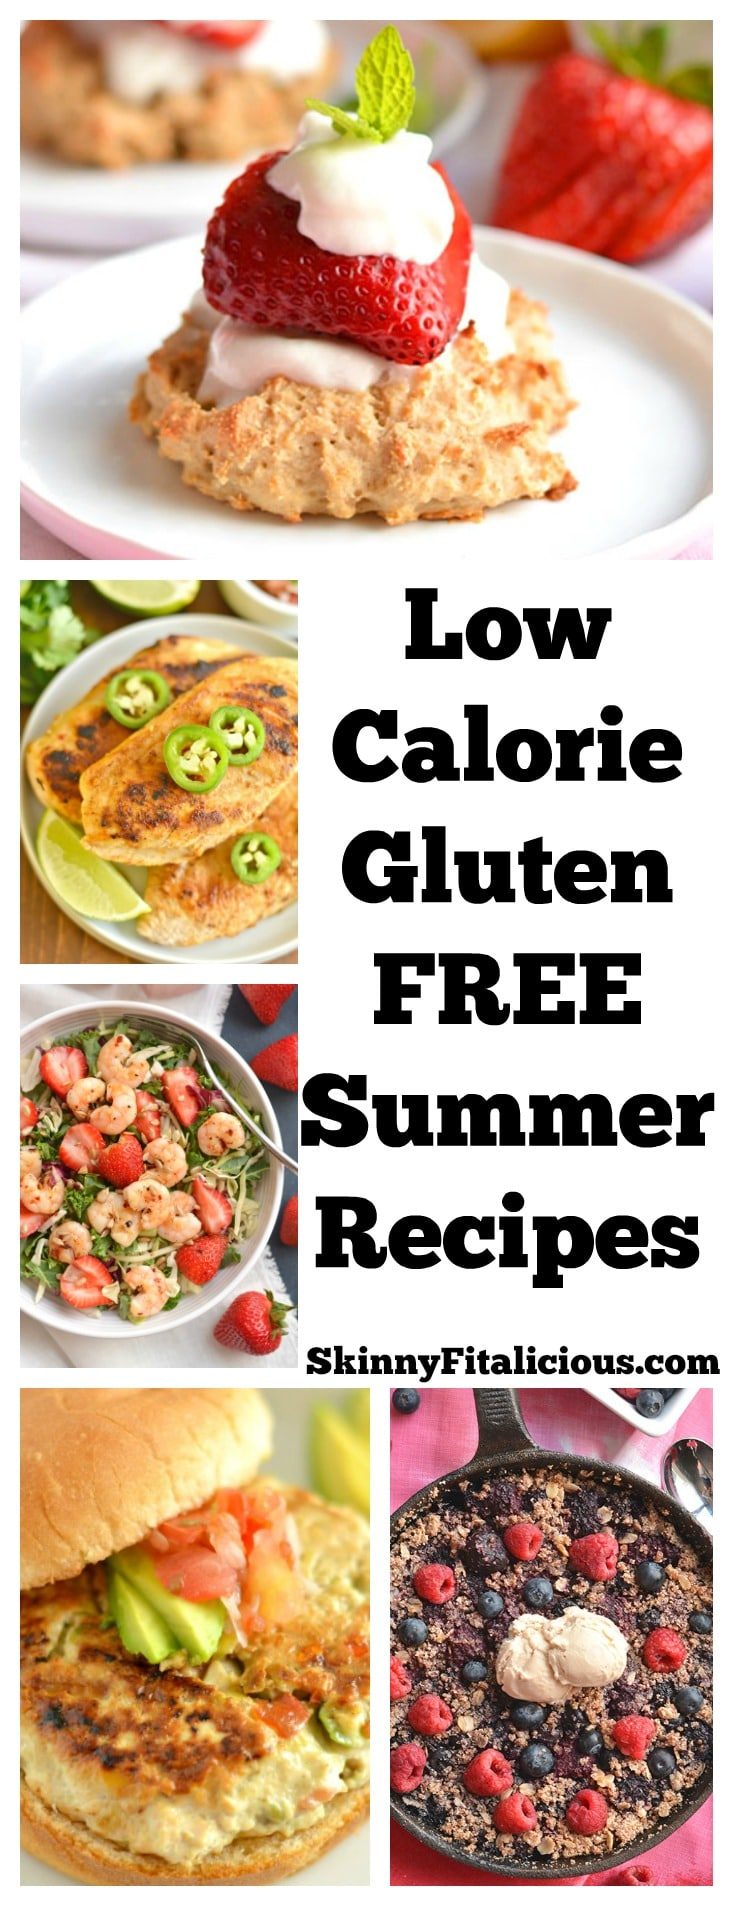 These Low Calorie Summer Recipes are perfect for summer gatherings, BBQ's, parties, or simply enjoying eating good food with family and friends! 